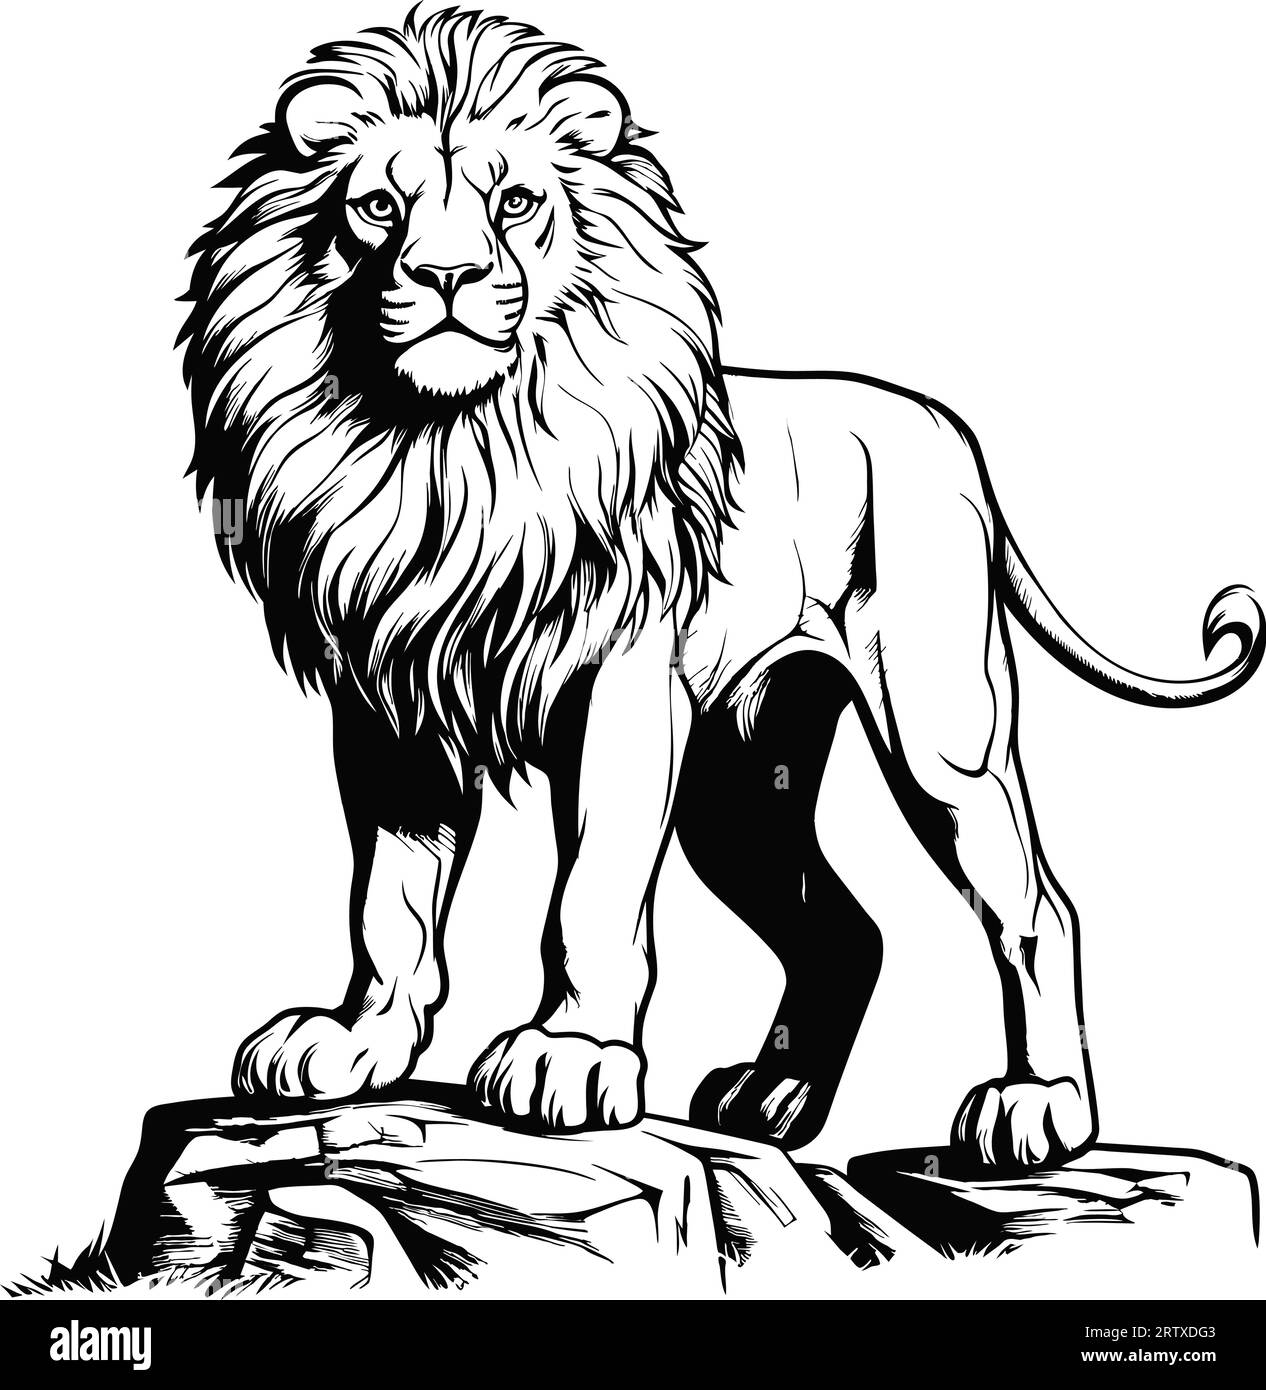 lion drawn with ink from the hands of a predator tattoo logo Stock Vector